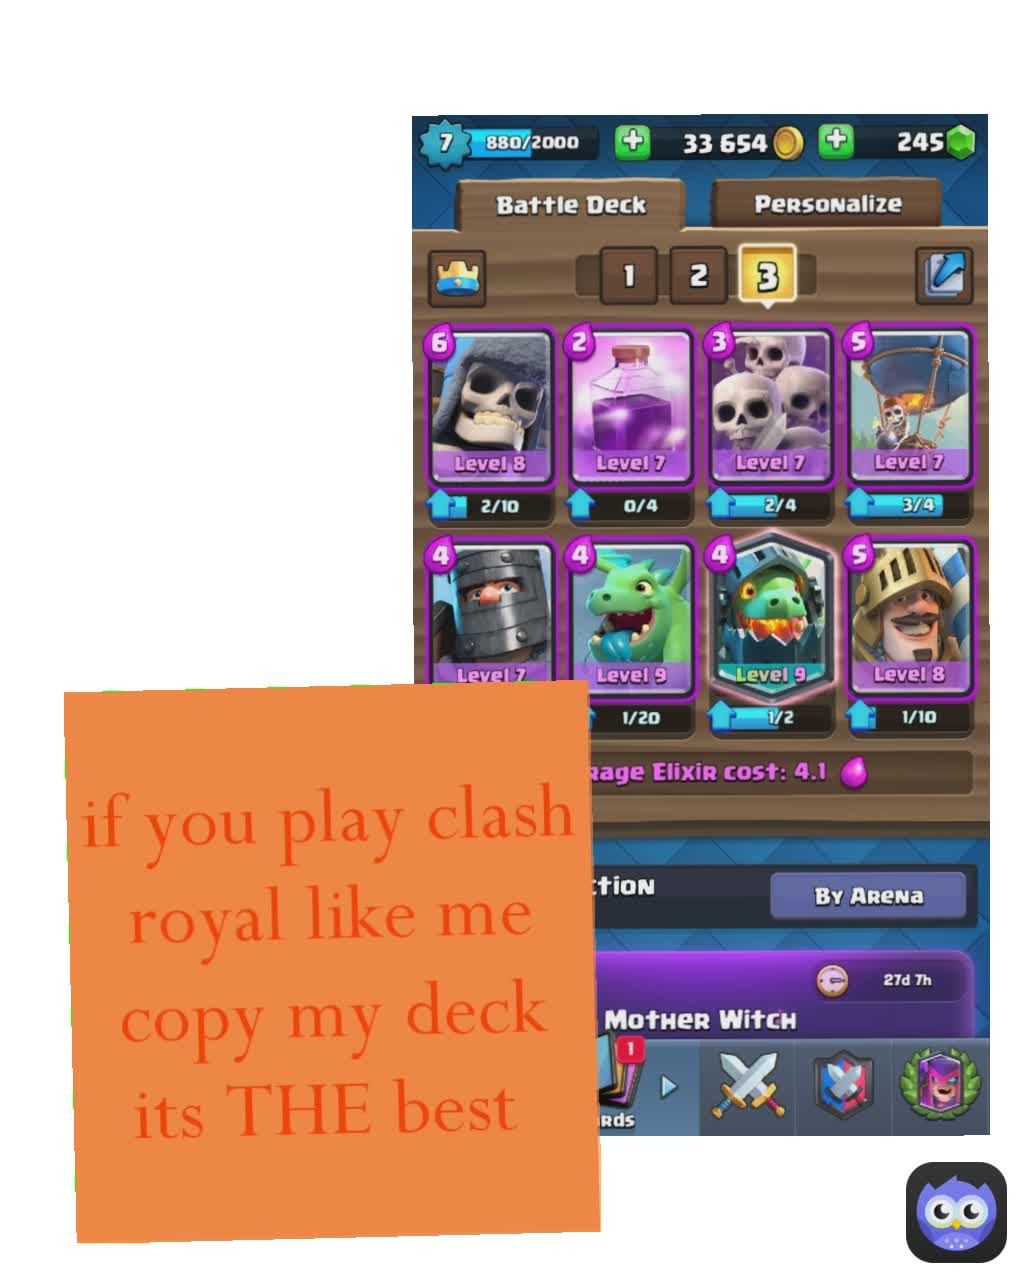 if you play clash royal like me copy my deck its THE best 